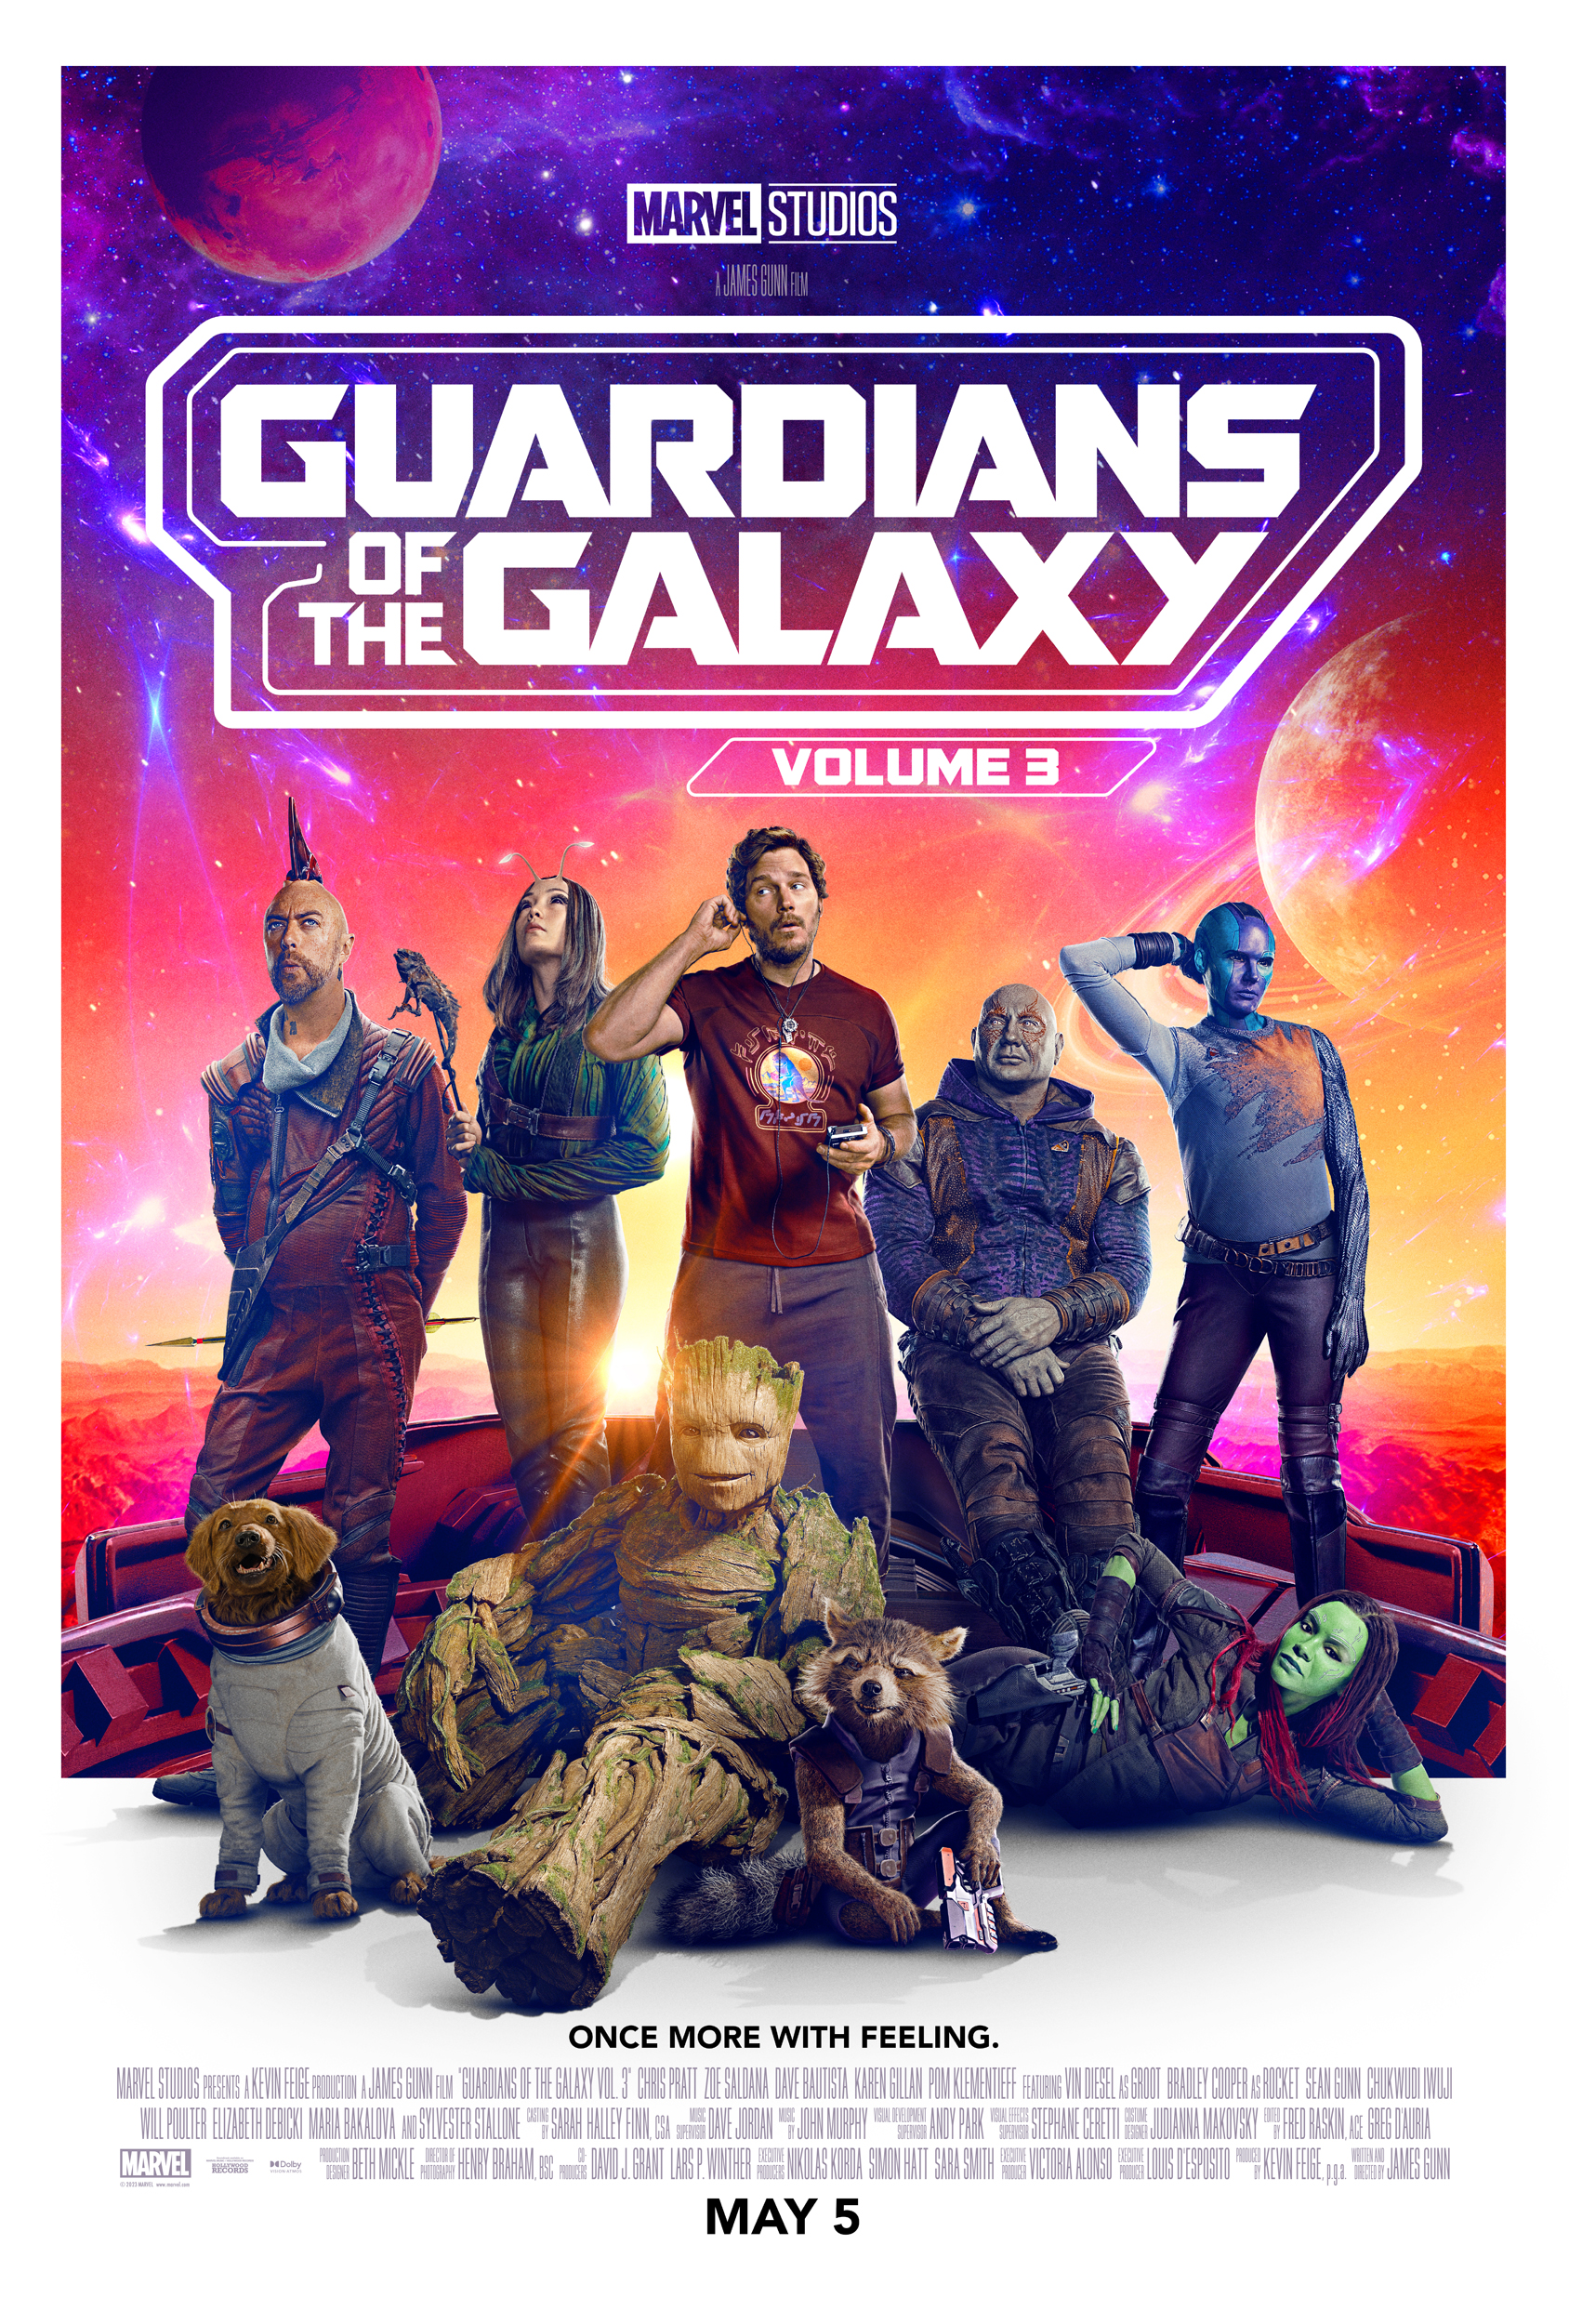 Guardians of the Galaxy Vol. 3 assets